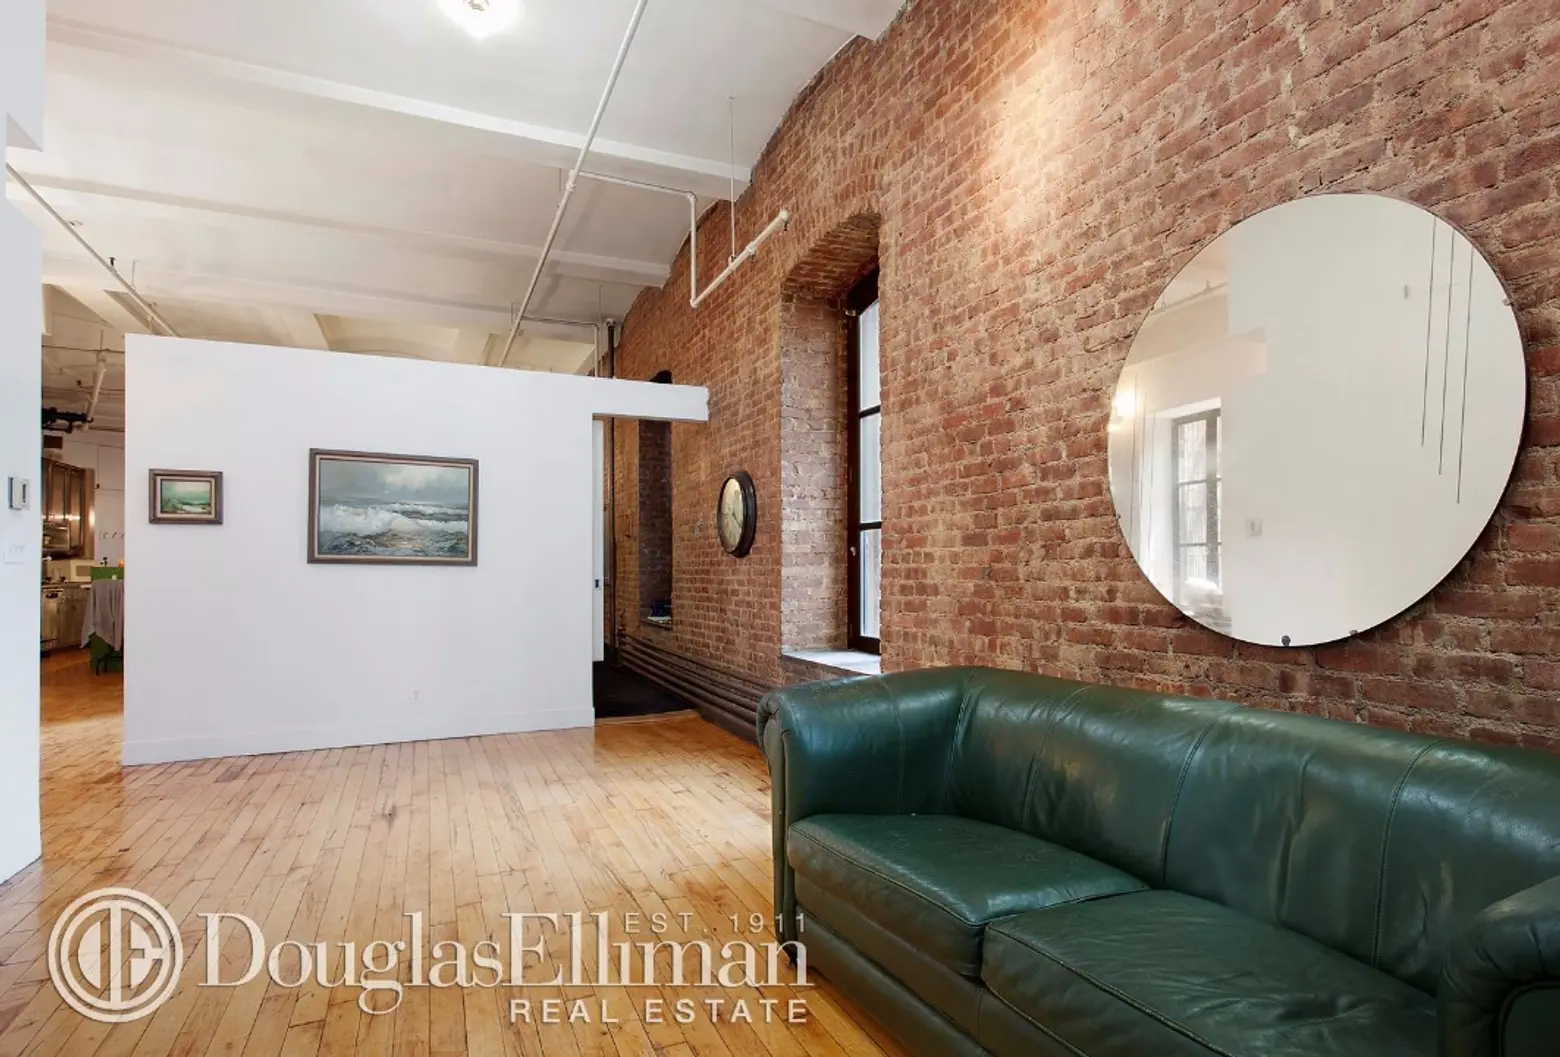 59 Fourth Avenue, flexible layout, barrel-vaulted ceilings